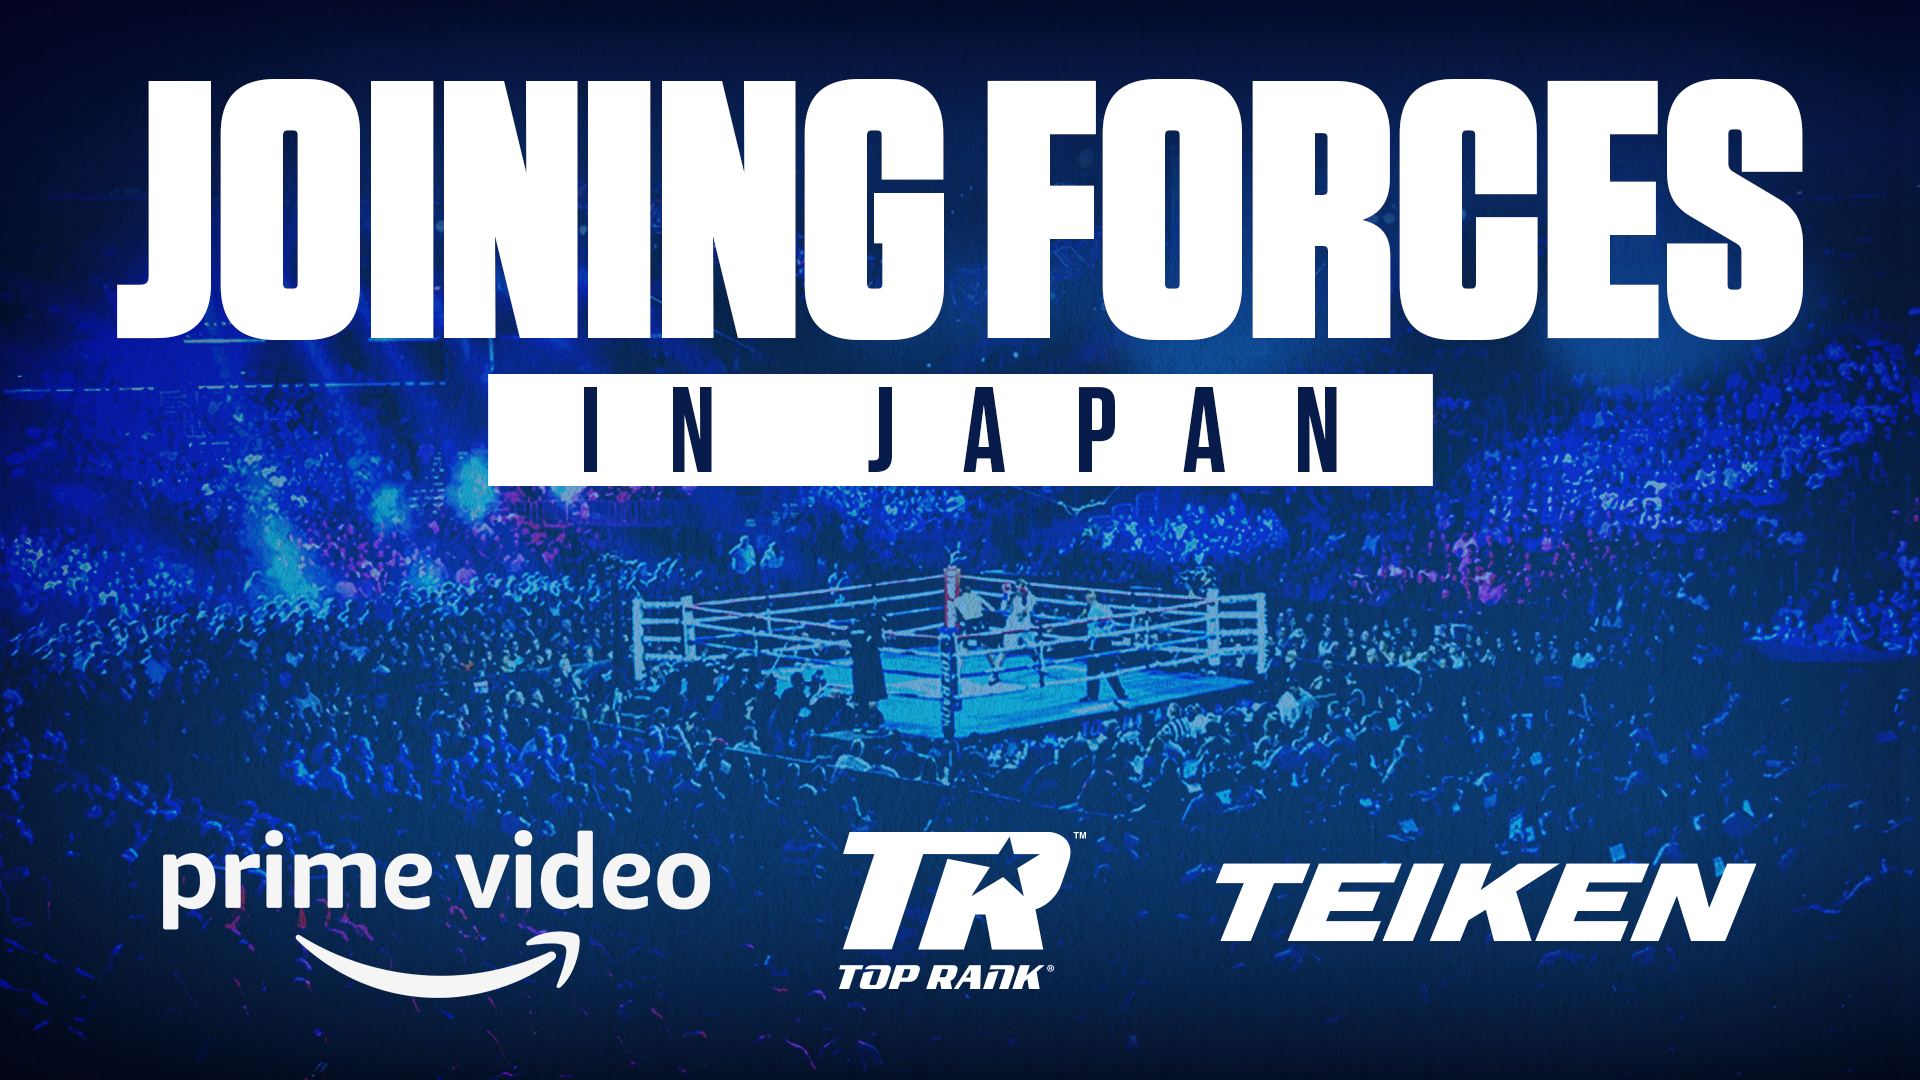 Top Rank Joins Forces with Prime Video in Japan to Stream Major Live Boxing Events